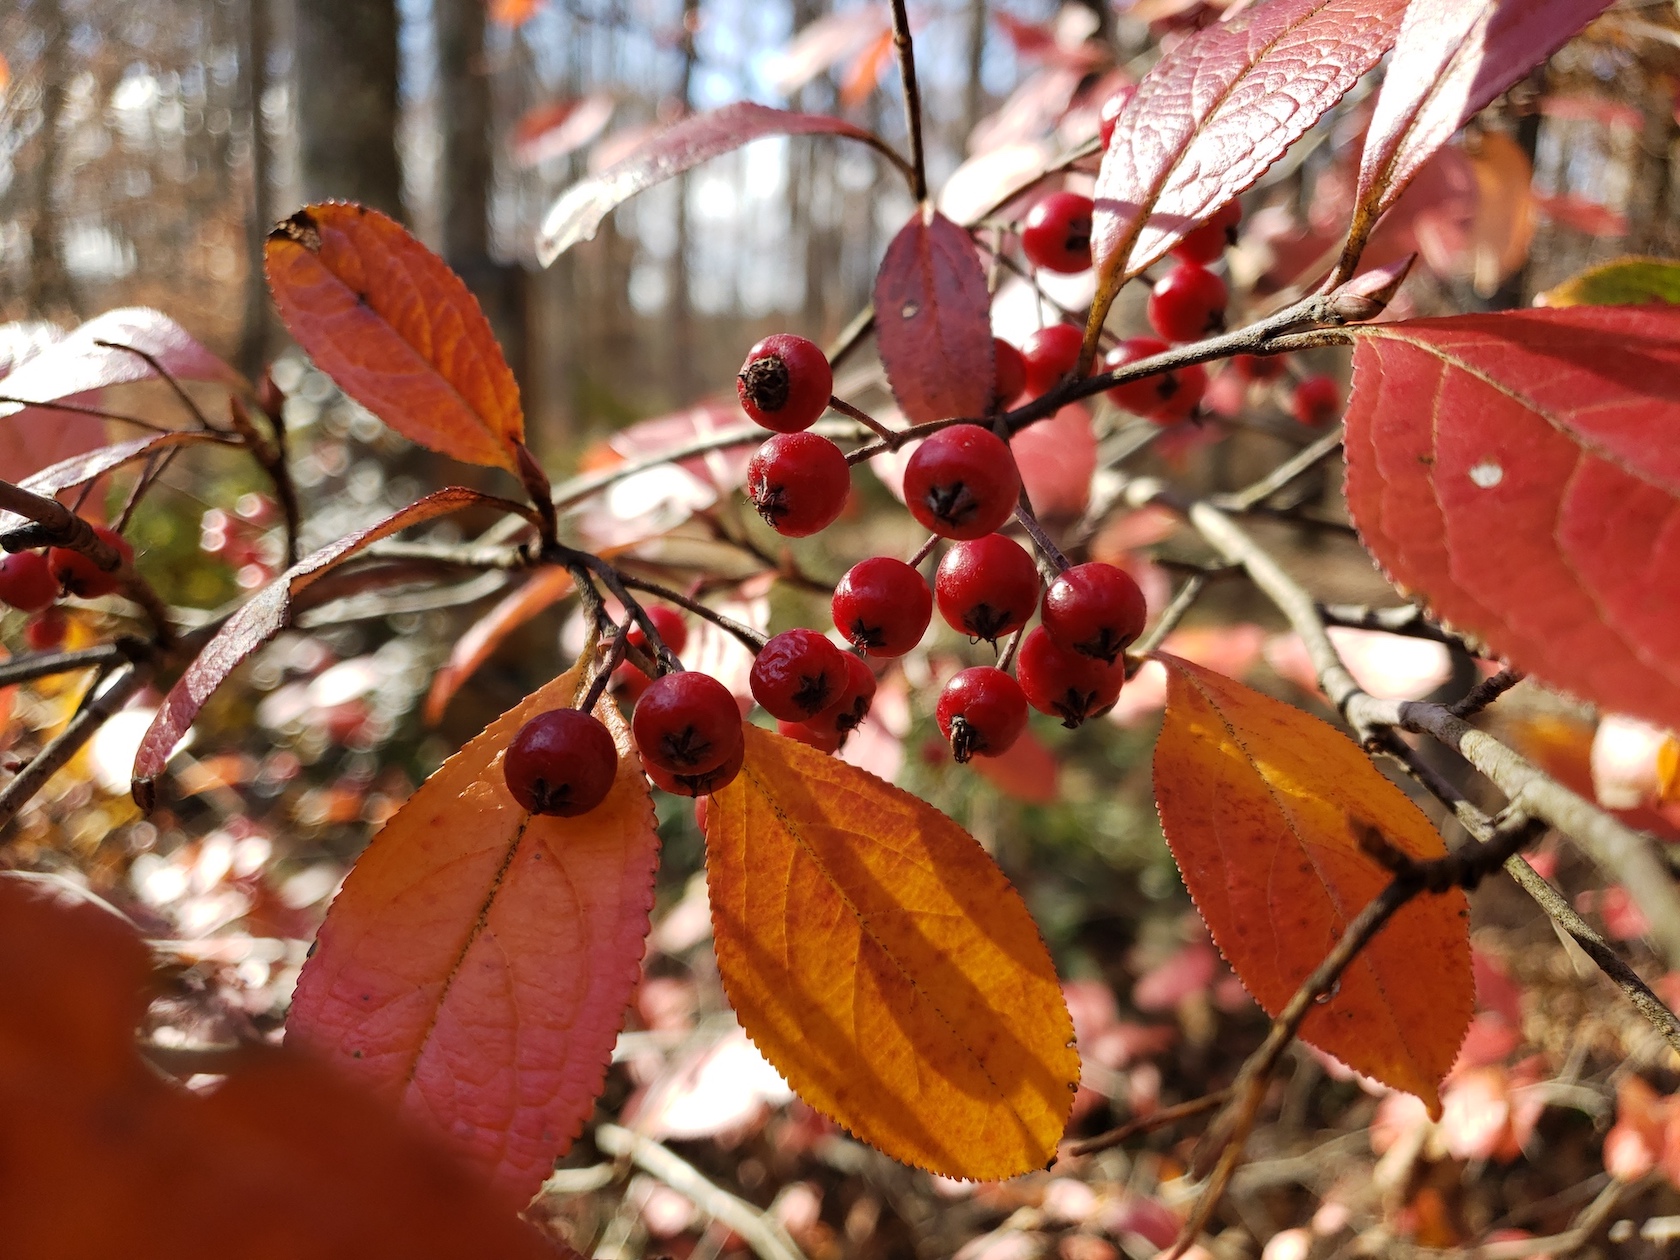 The Scientific Name is Aronia arbutifolia [= Photinia pyrifolia, Sorbus arbutifolia, Pyrus arbutifolia]. You will likely hear them called Red Chokeberry. This picture shows the Attractive Fall color of Aronia arbutifolia [= Photinia pyrifolia, Sorbus arbutifolia, Pyrus arbutifolia]